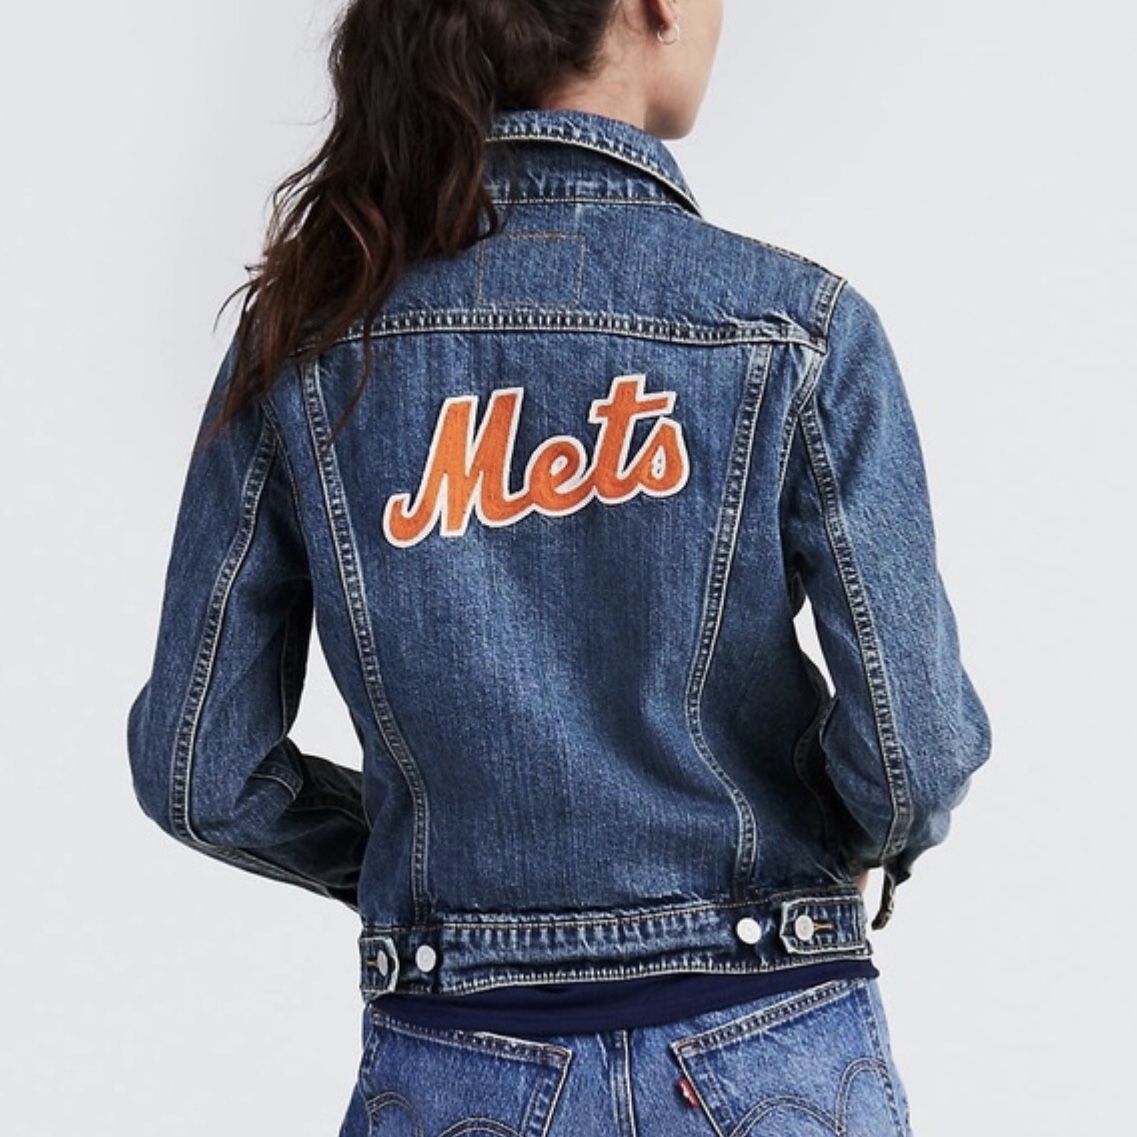 Levi's MLB NY Mets Jean Jacket for Sale in Union City, NJ - OfferUp